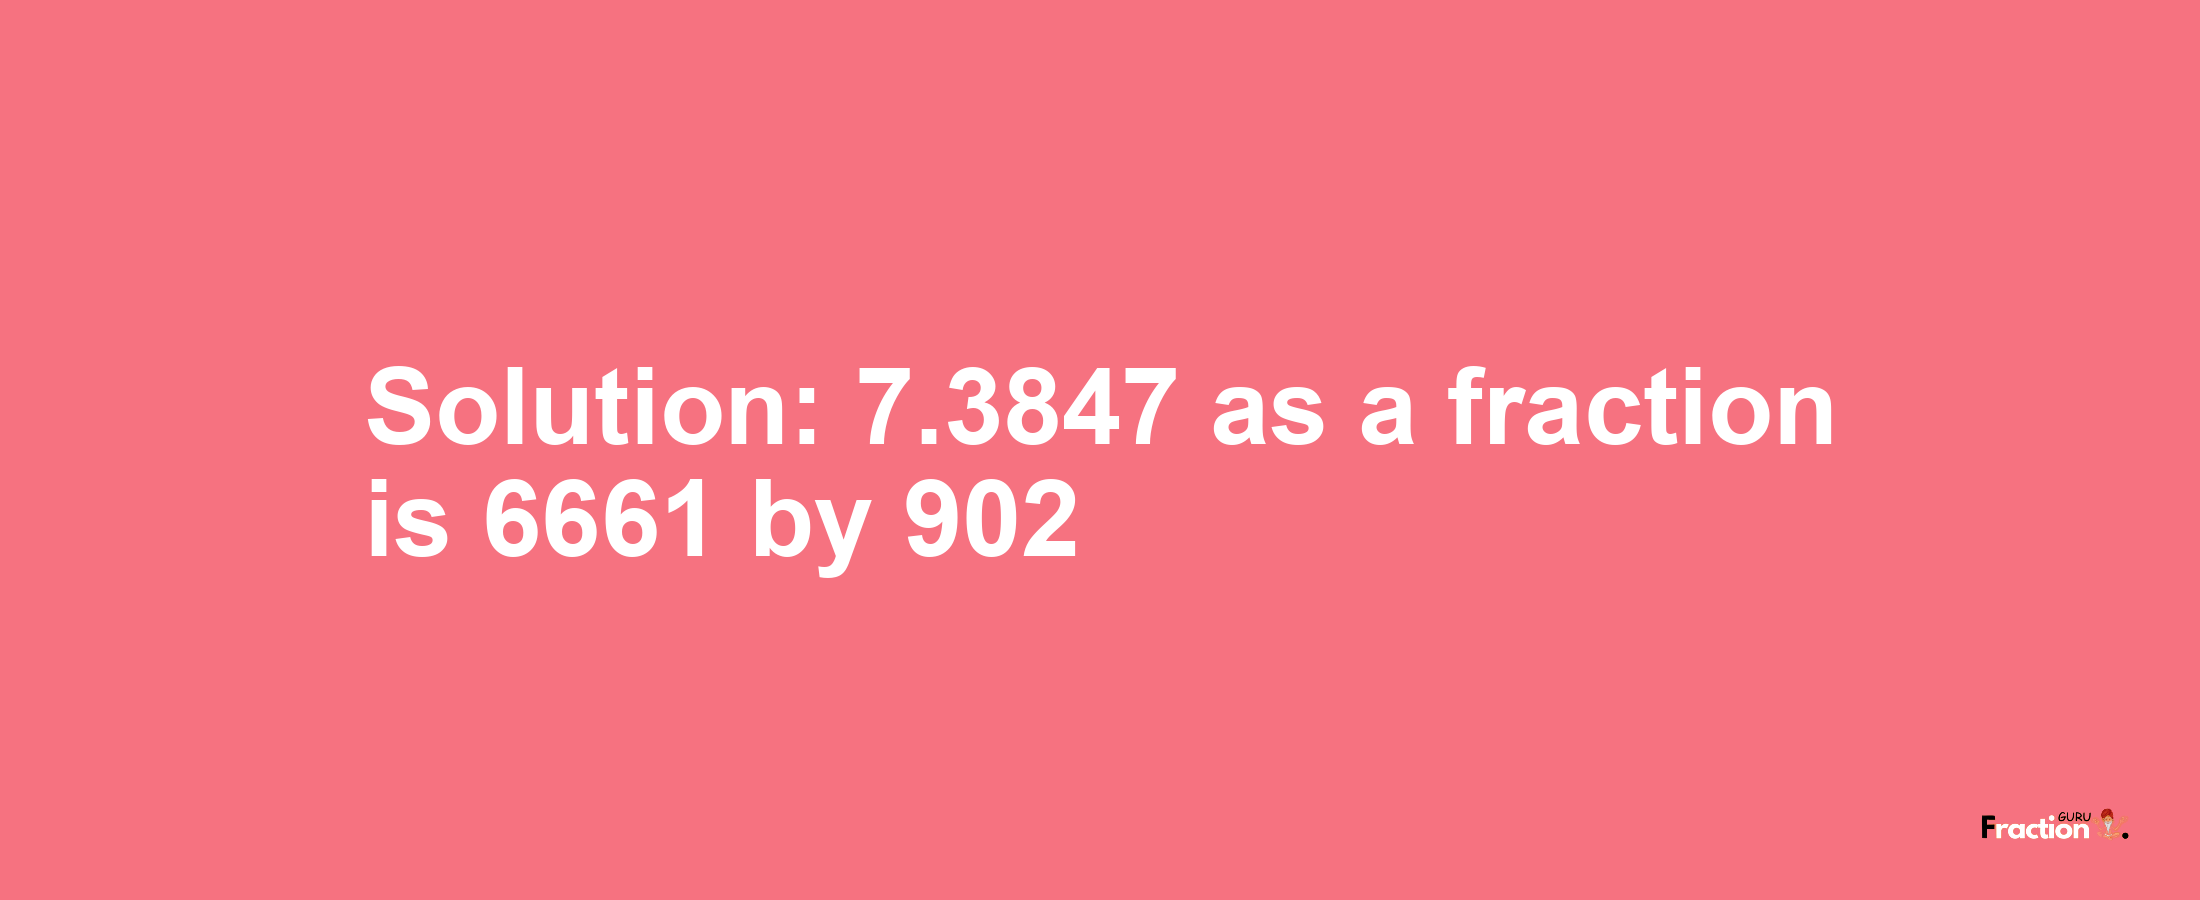 Solution:7.3847 as a fraction is 6661/902